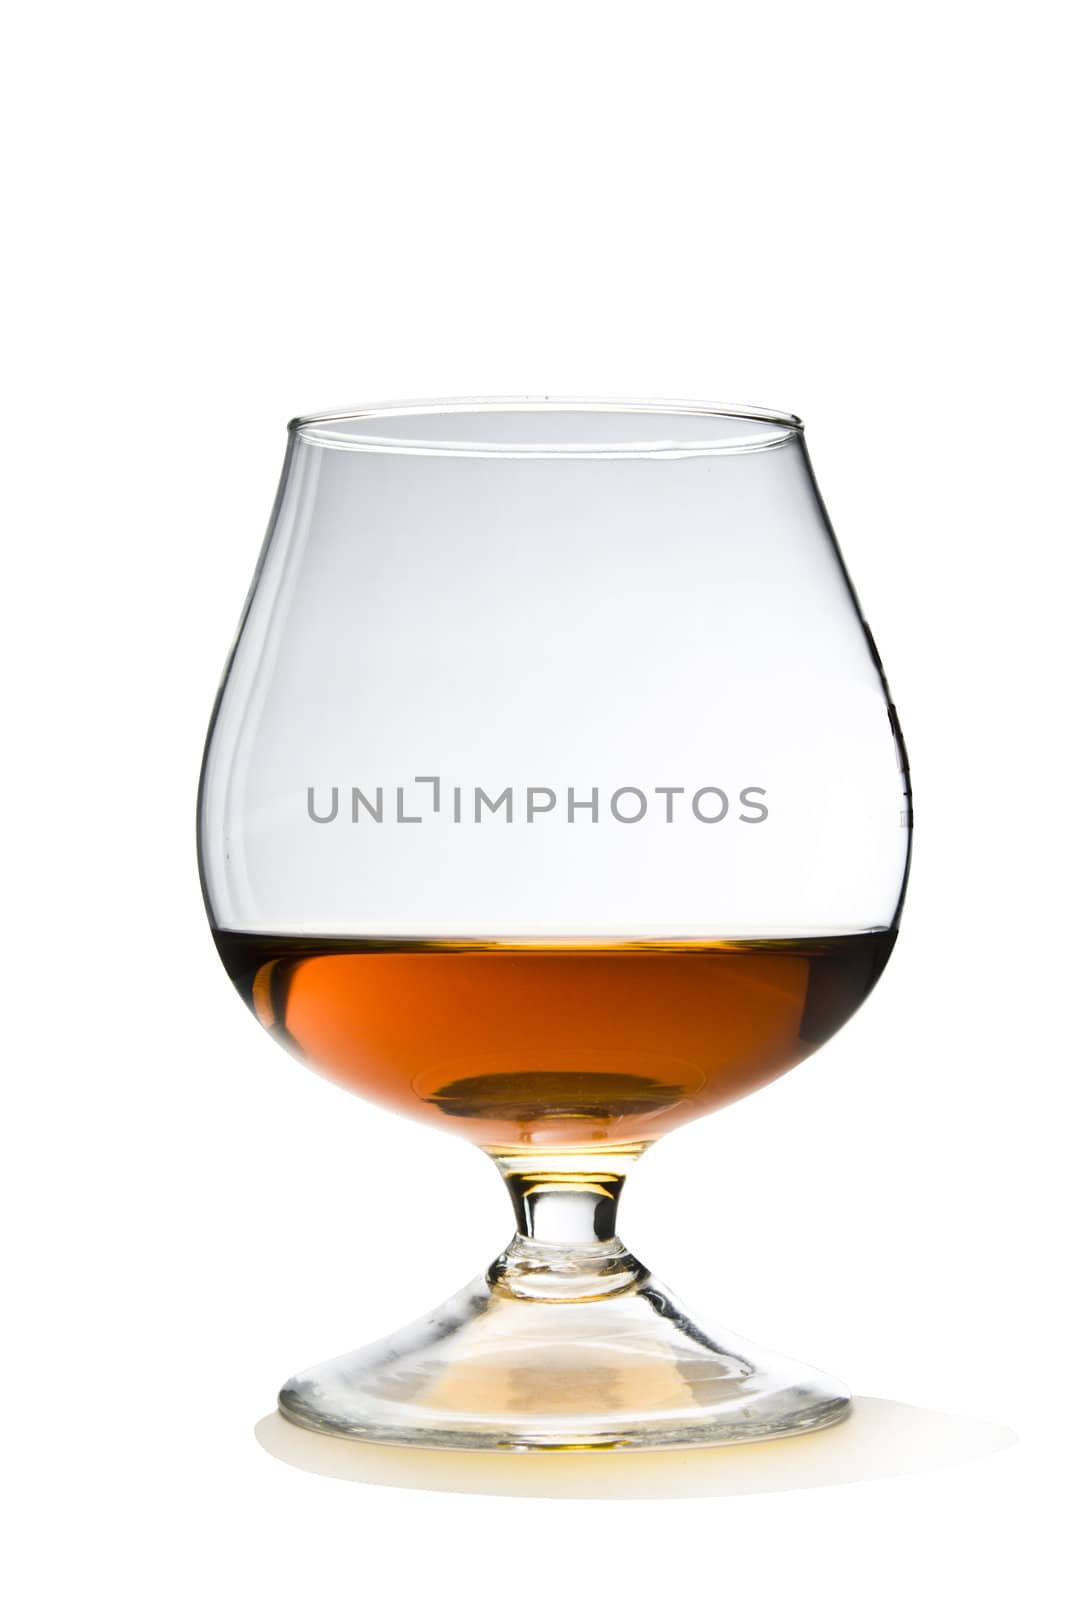 Cognac and Glass Snifter on White with Clipping Path Included.